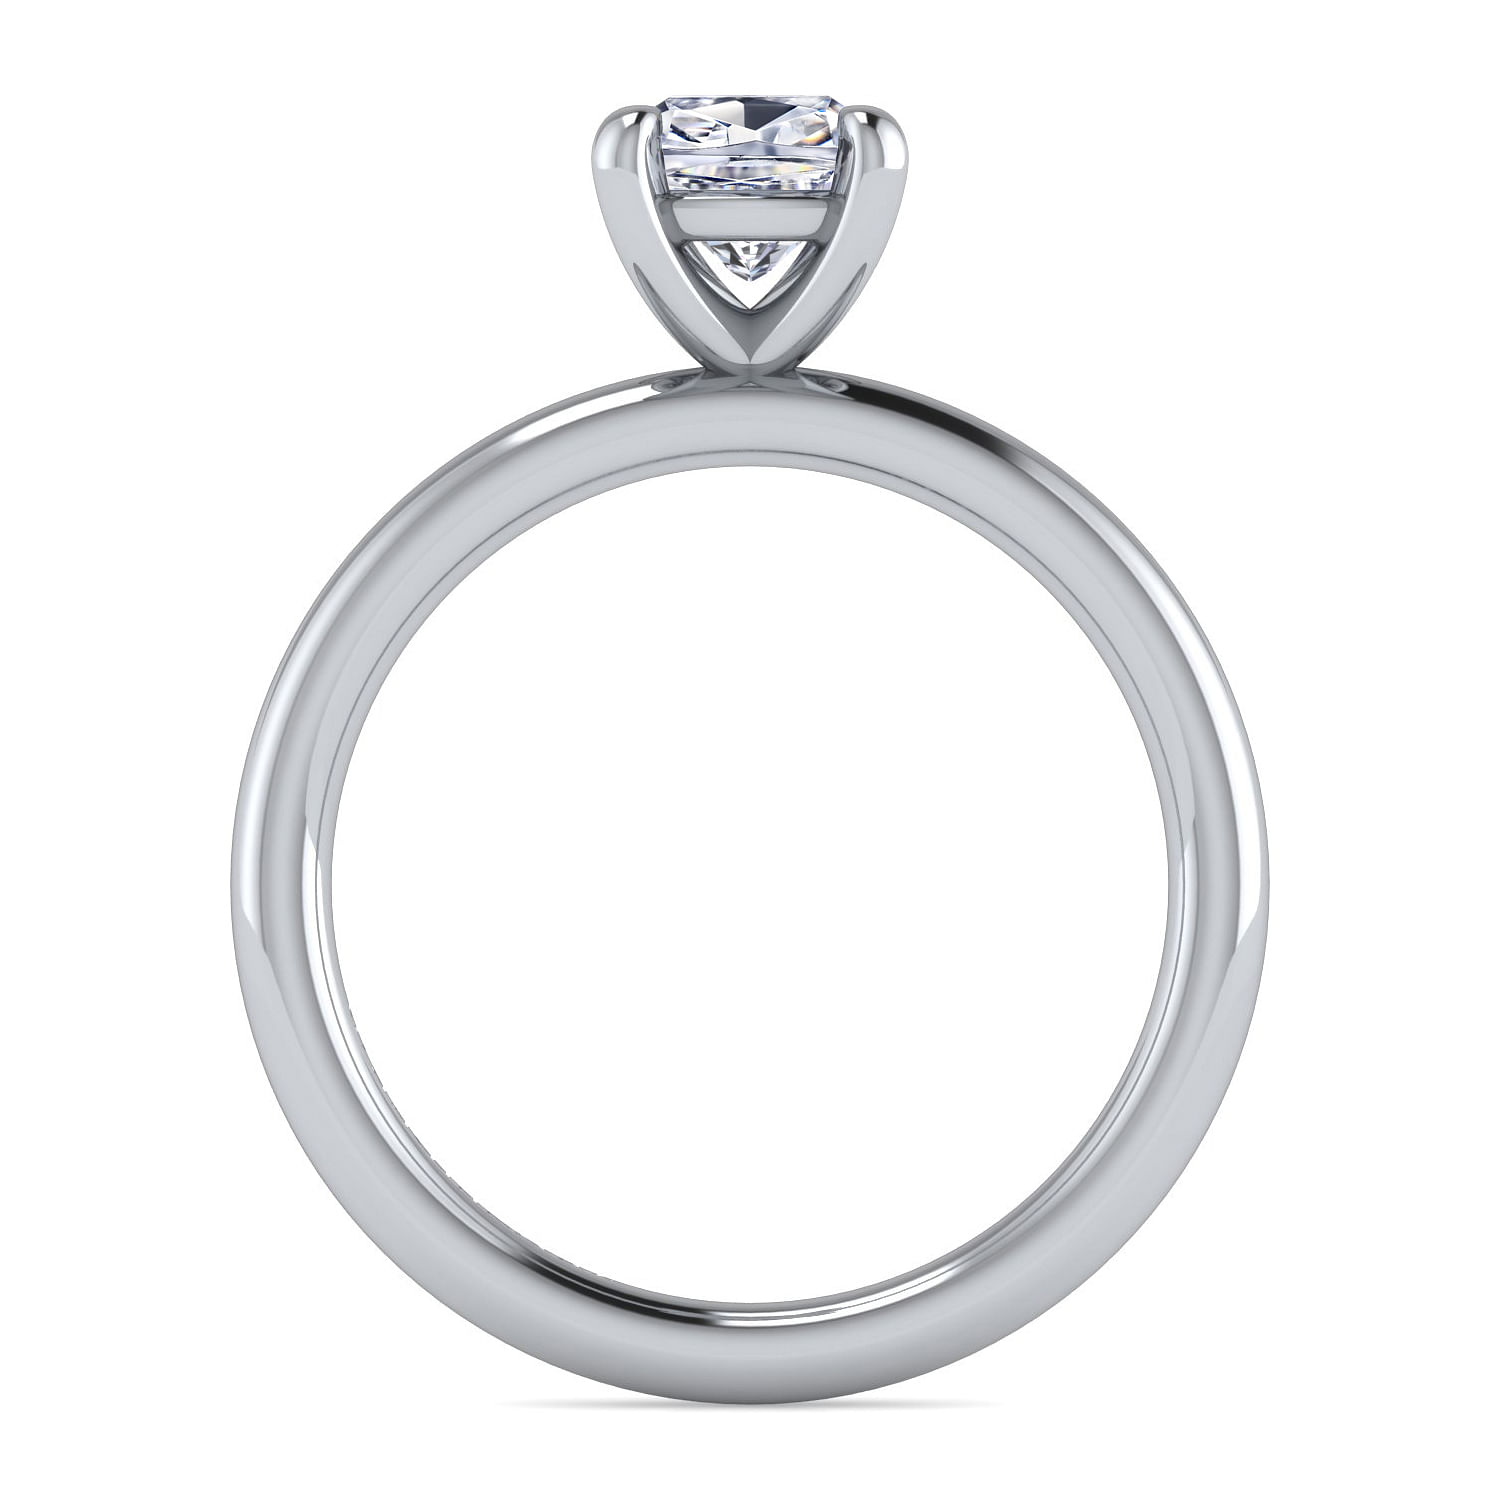 14K White Gold Cushion Cut Solitaire Engagement Ring